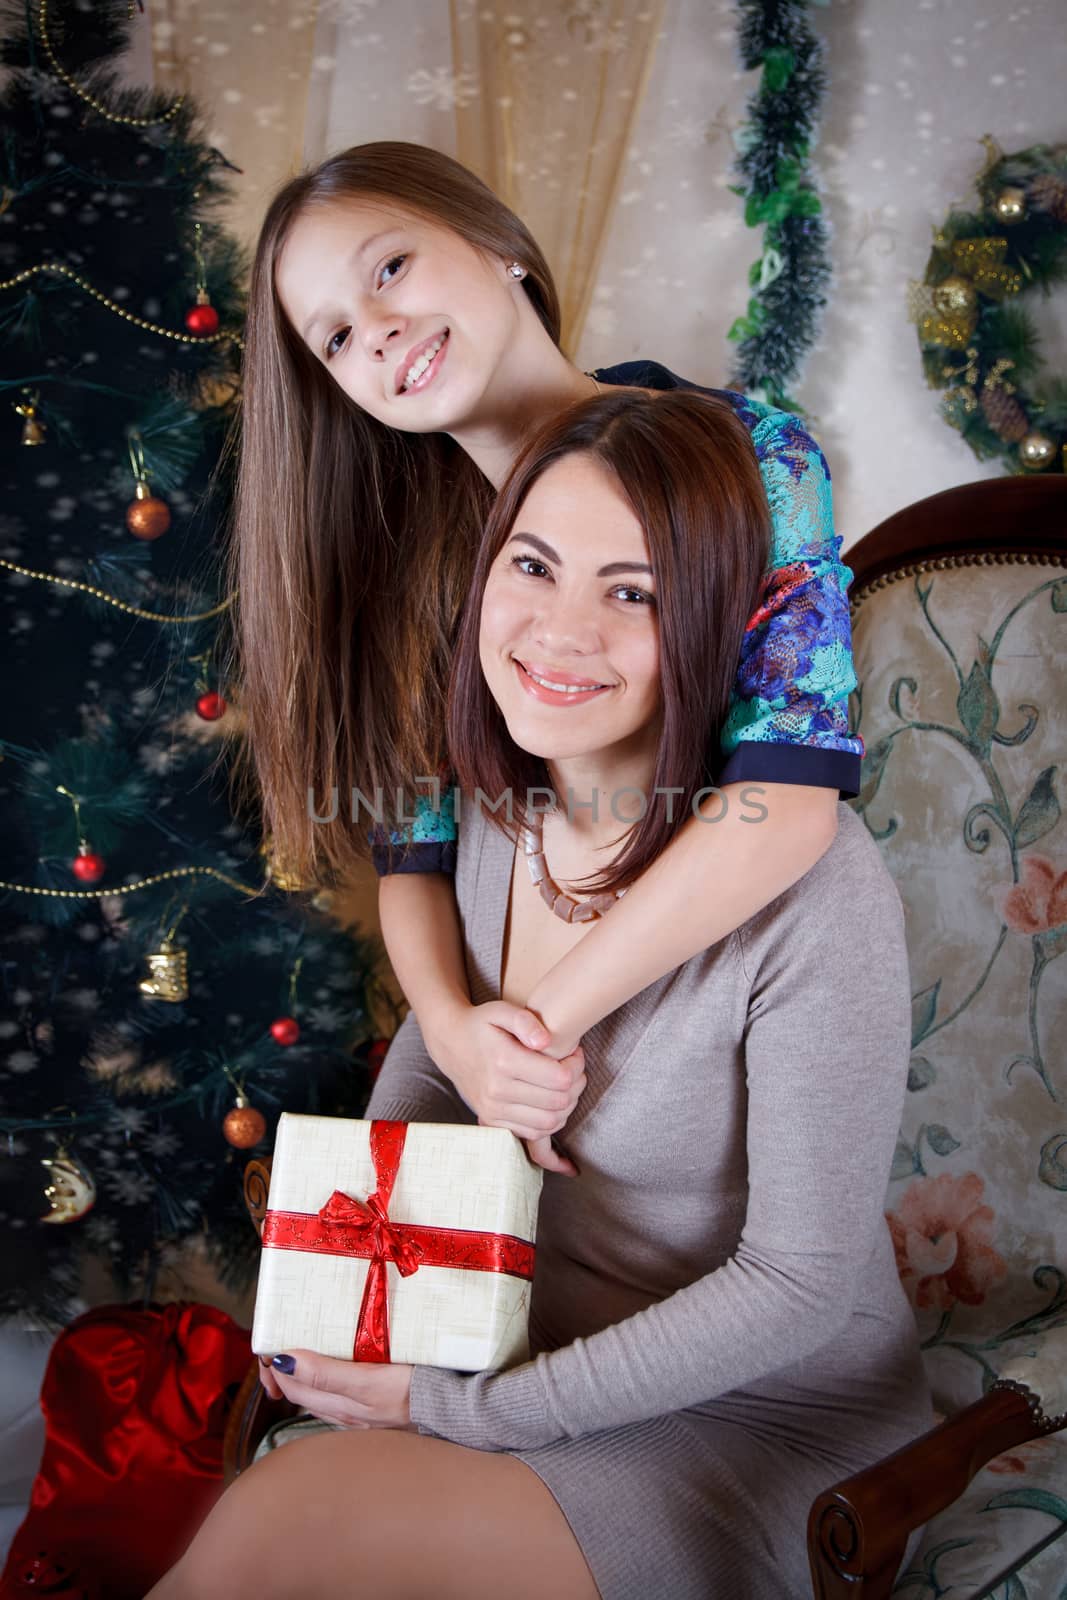 Daughter and mother under Christmas tree by Angel_a